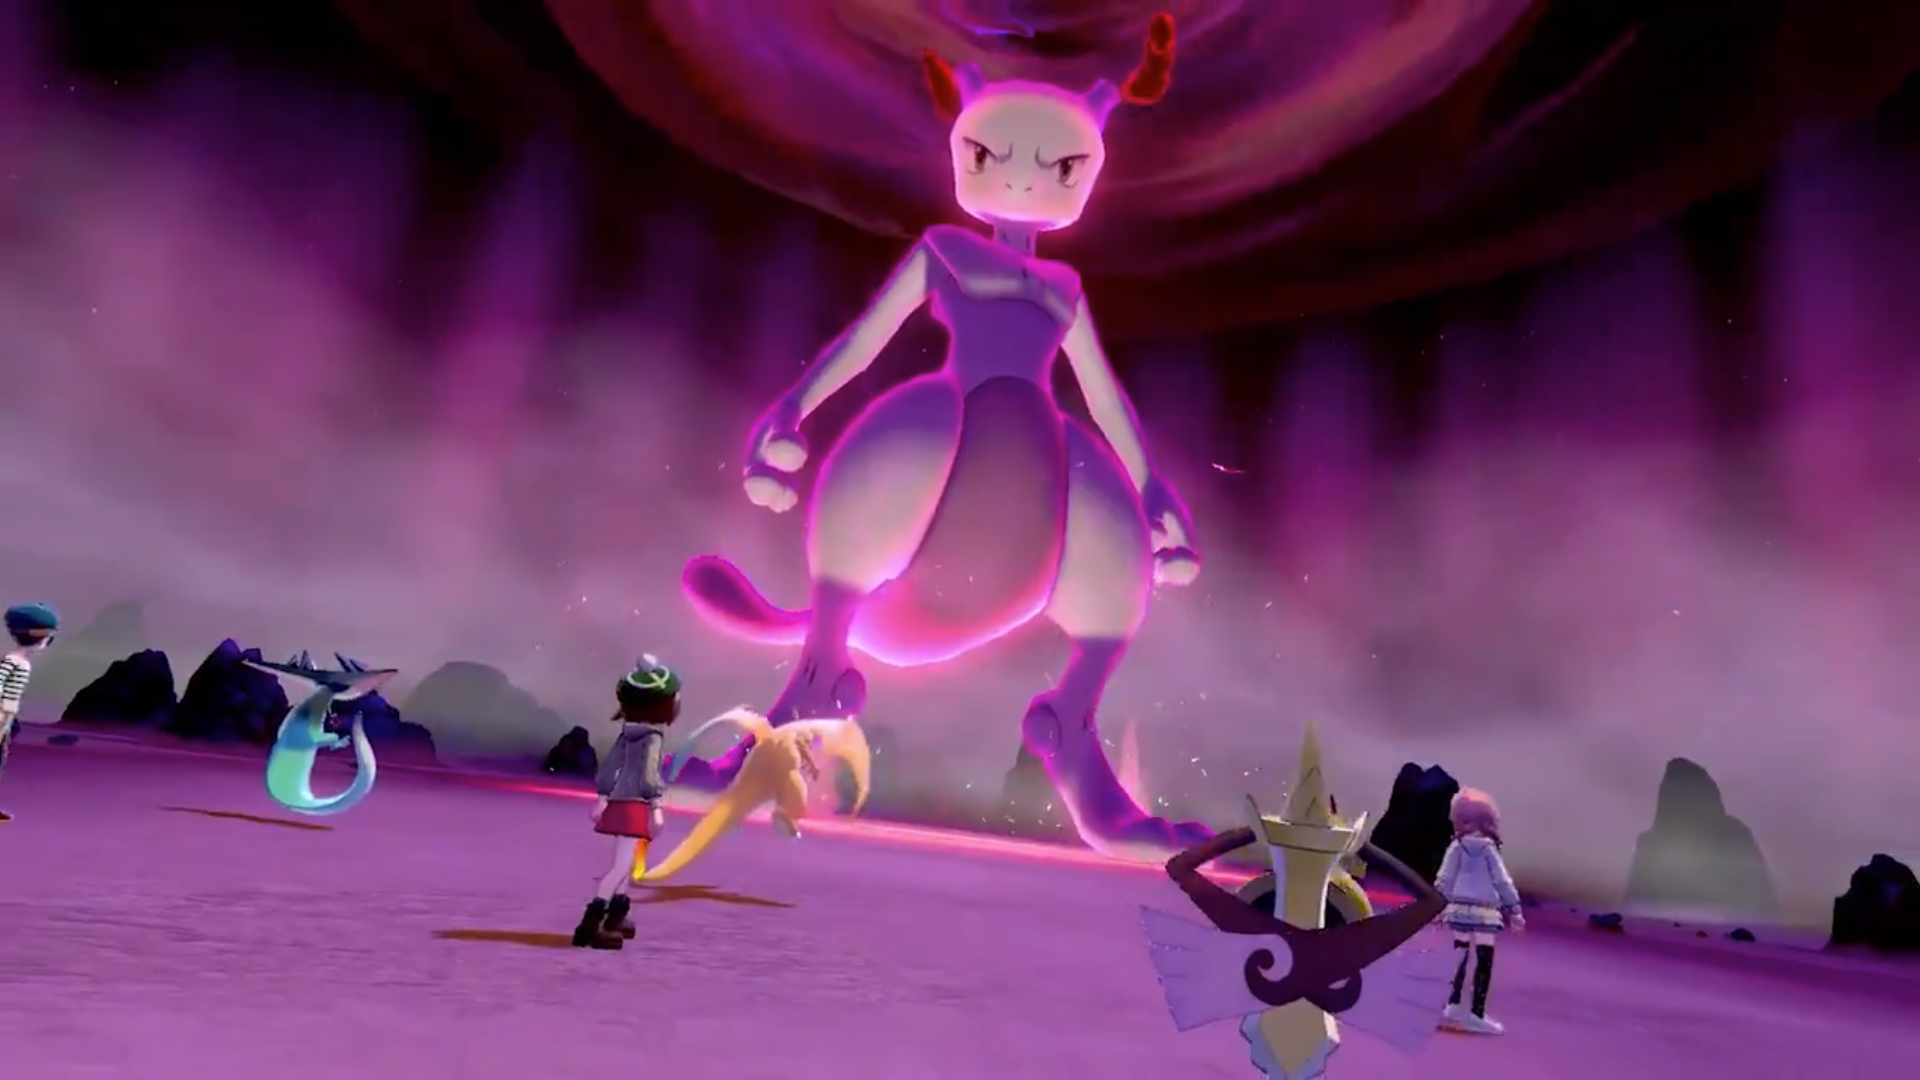 Armored Mewtwo Coming Back to Pokemon Go - Gamer Journalist